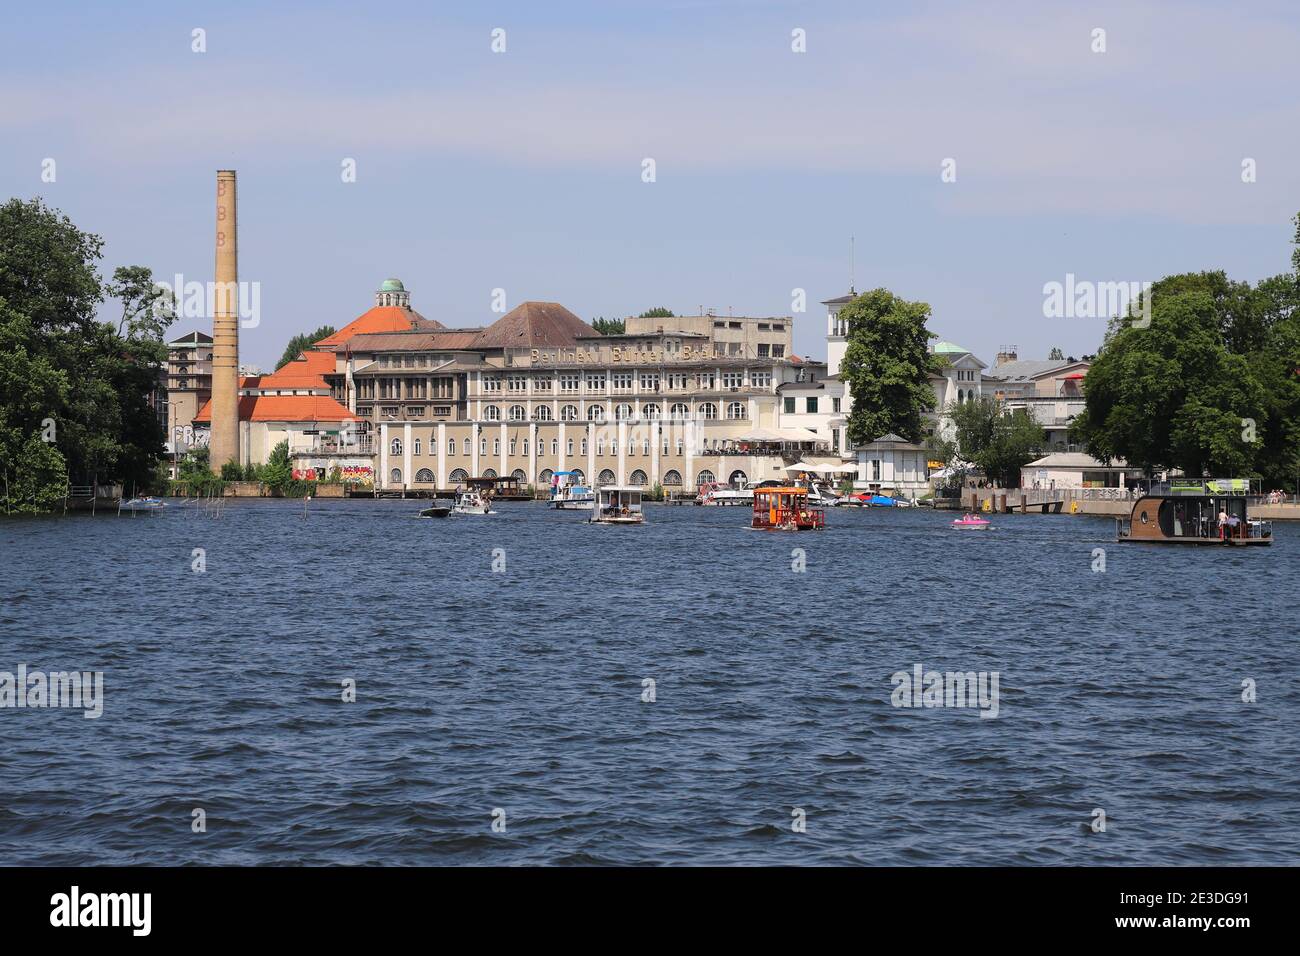 GERMANY, BERLIN, TREPTOW-KÖPENICK - JUNE 09, 2018: Building of the Berliner Bürgerbräu brewery wich closed the beer production in 2010. Stock Photo